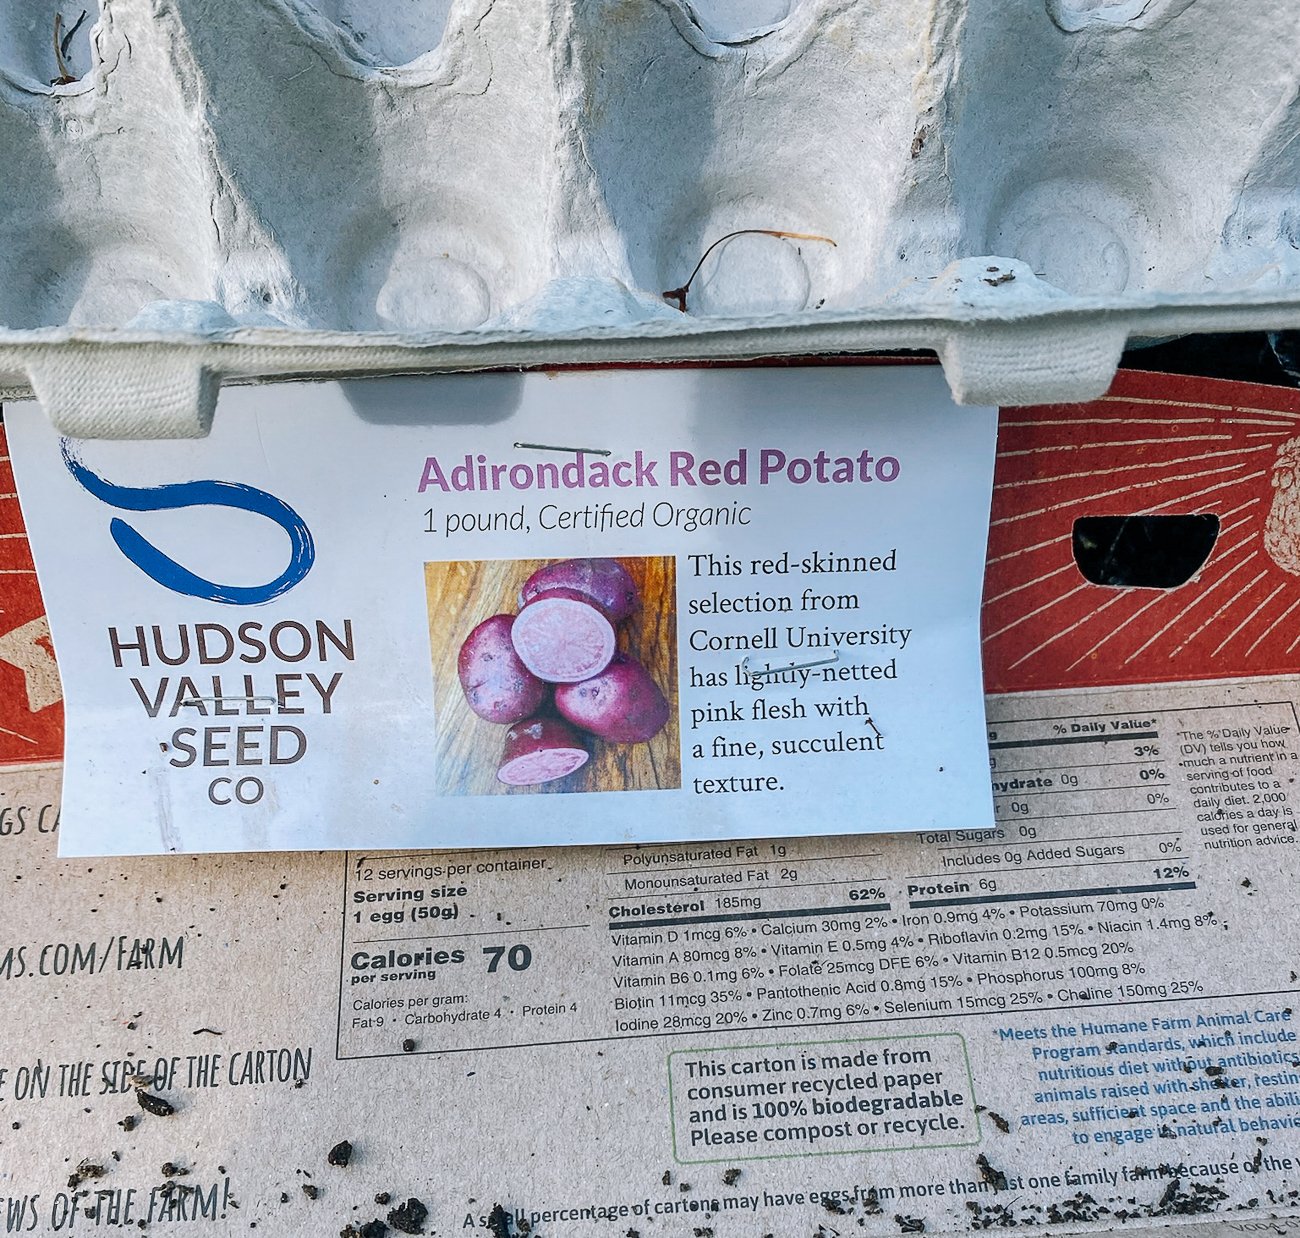 Adirondack red potato label from Hudson Valley Seed Co. 